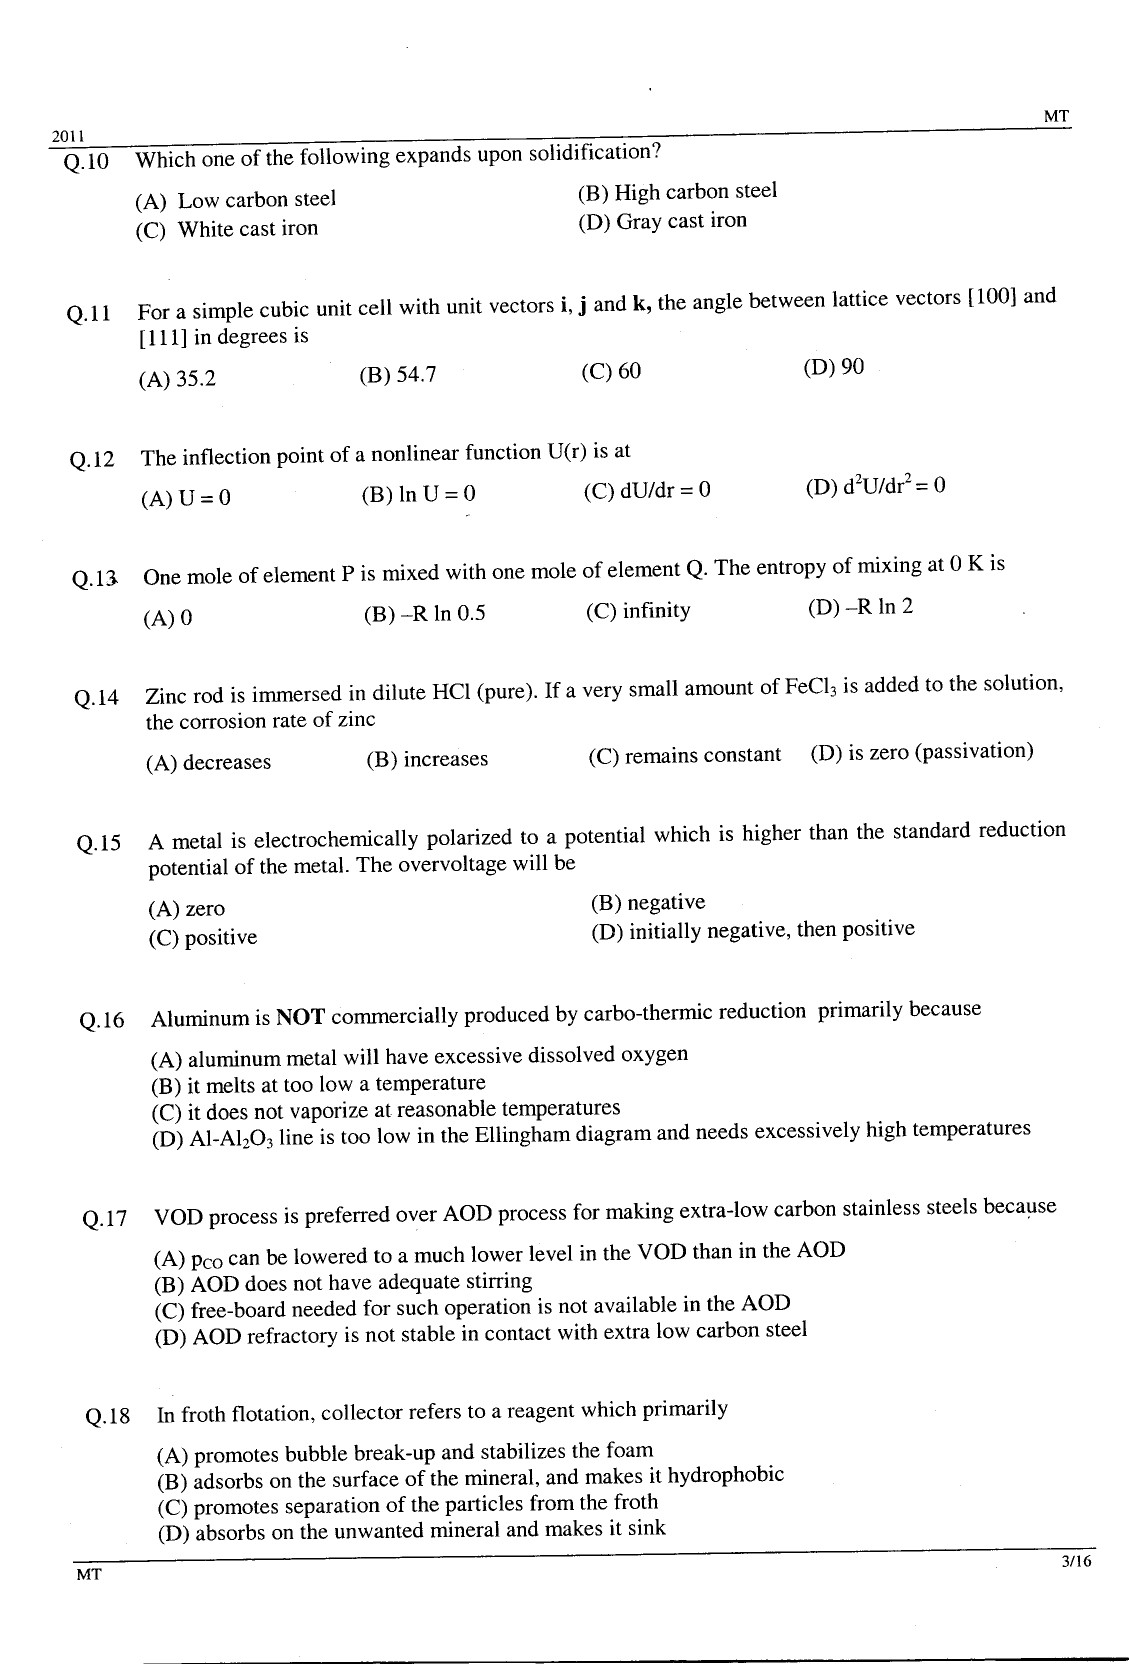 GATE Exam Question Paper 2011 Metallurgical Engineering 3